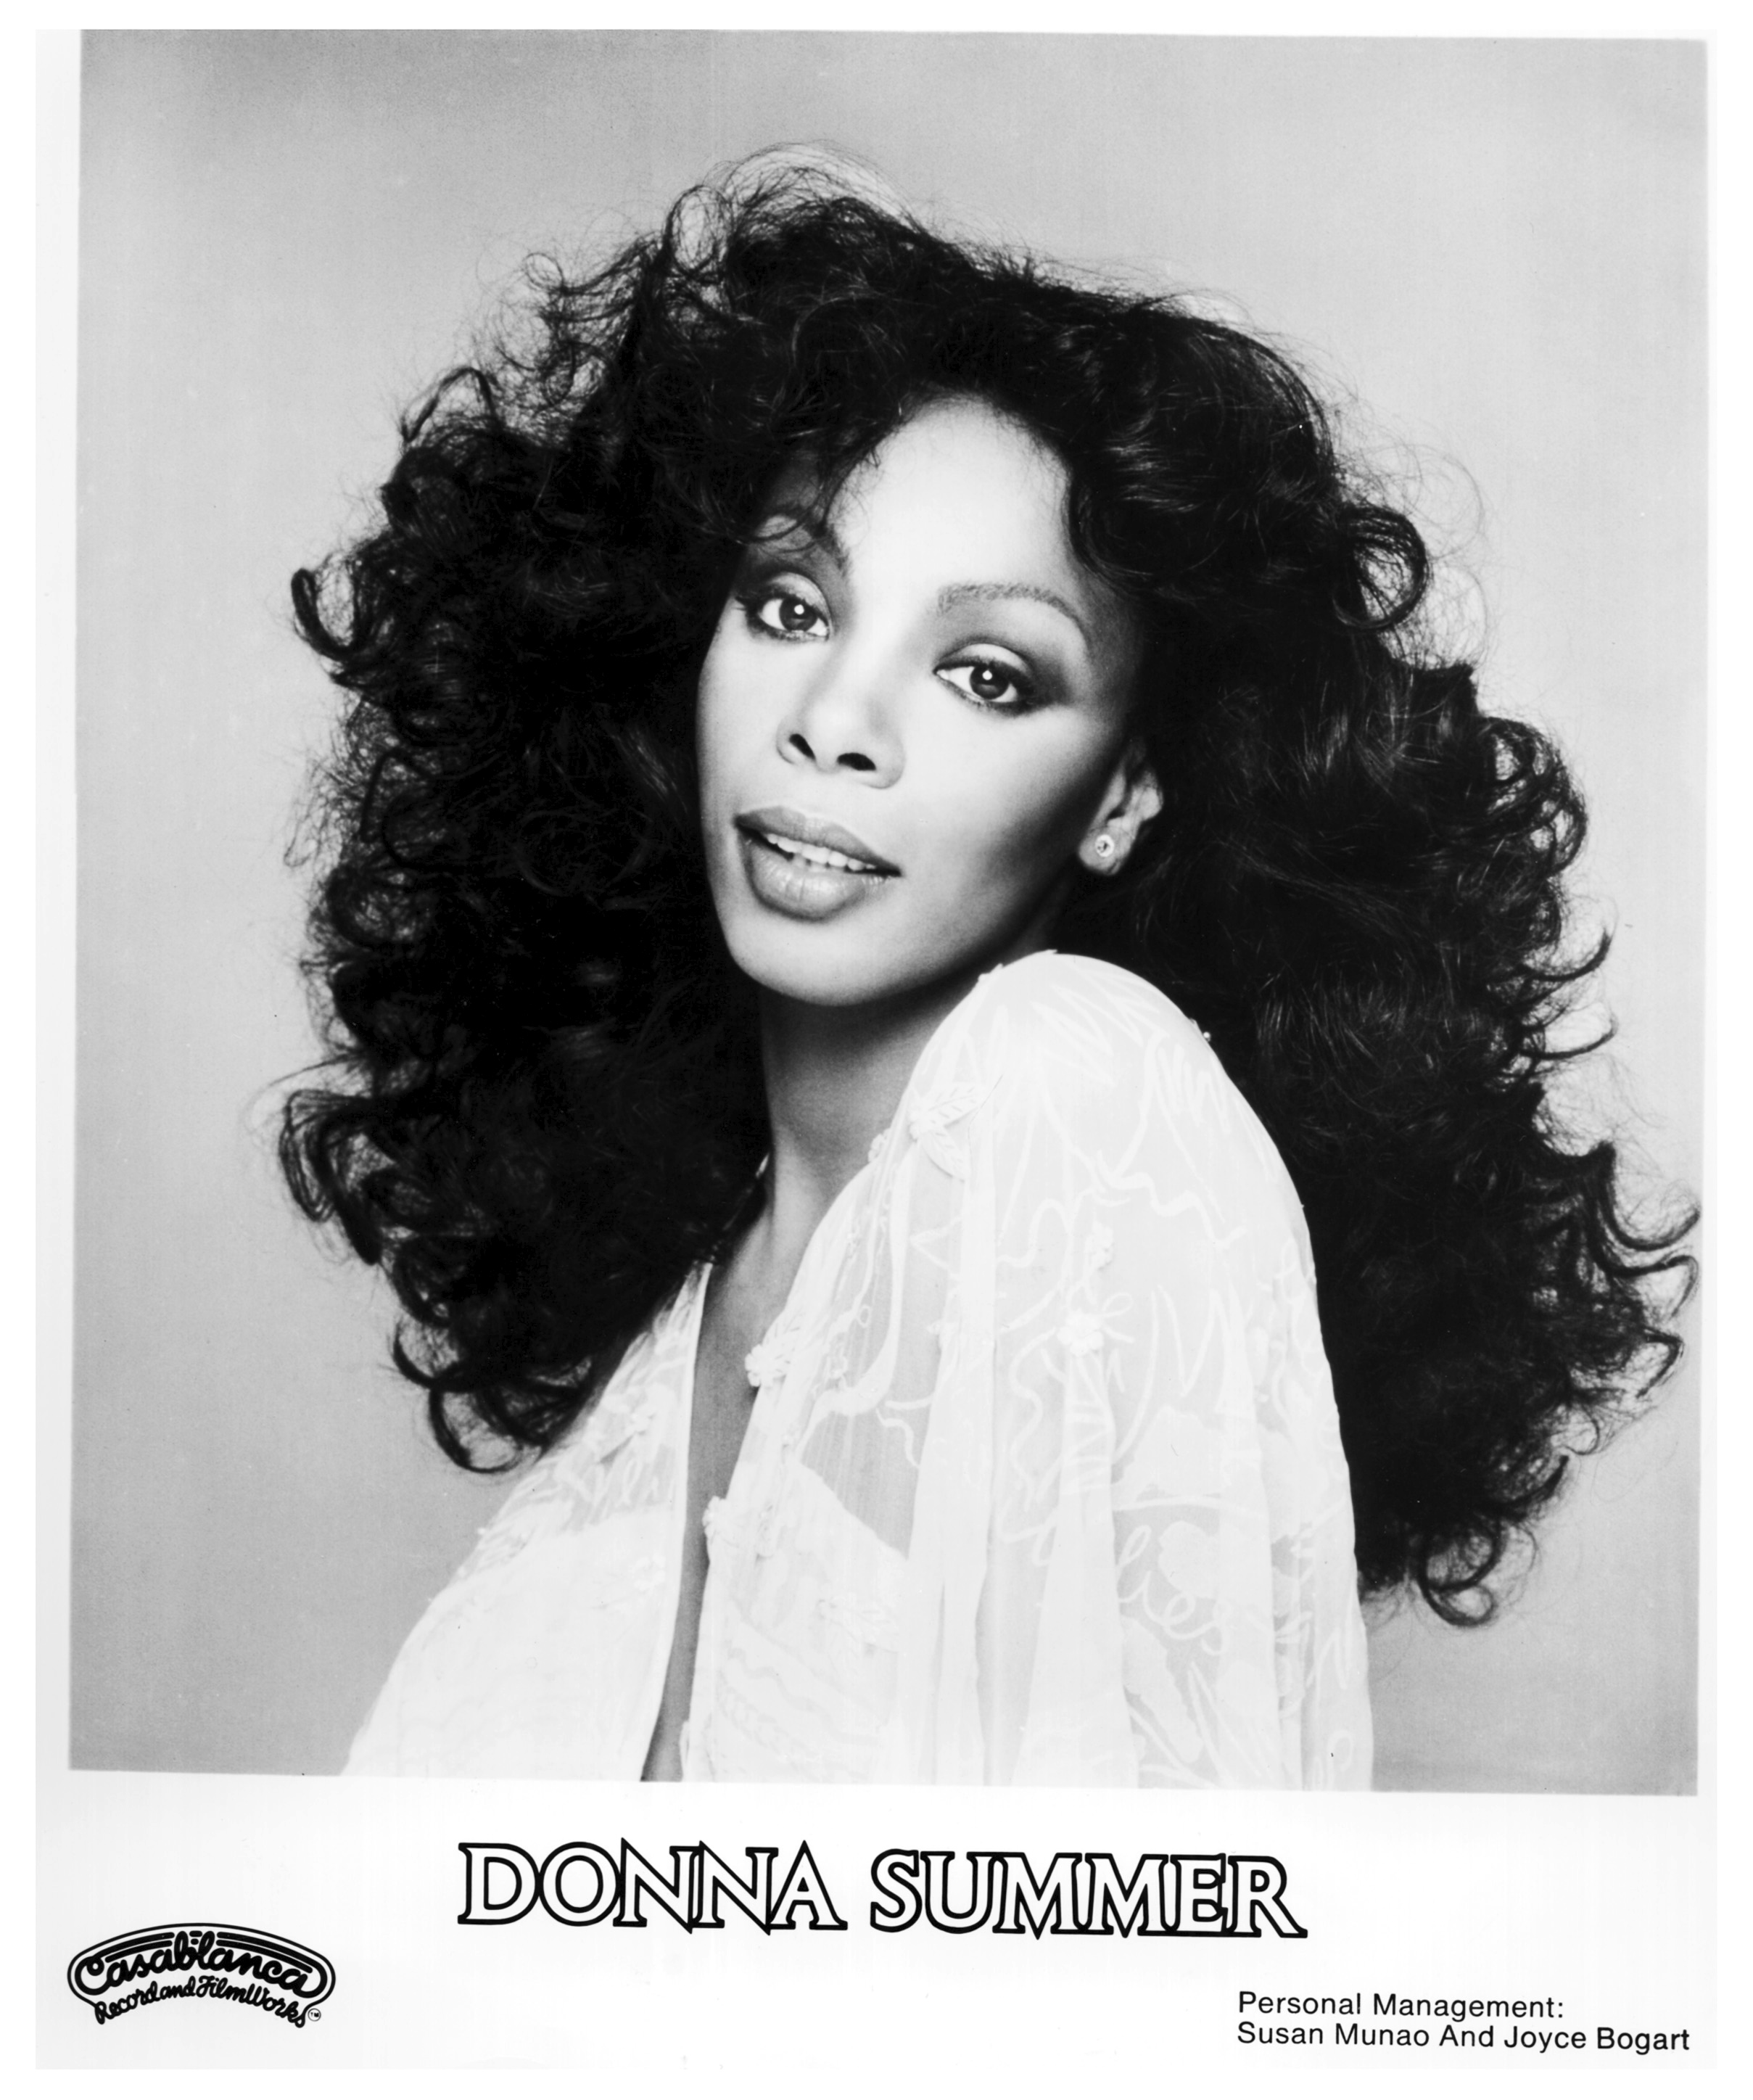 How To Watch The New Donna Summer Documentary On Hbo…